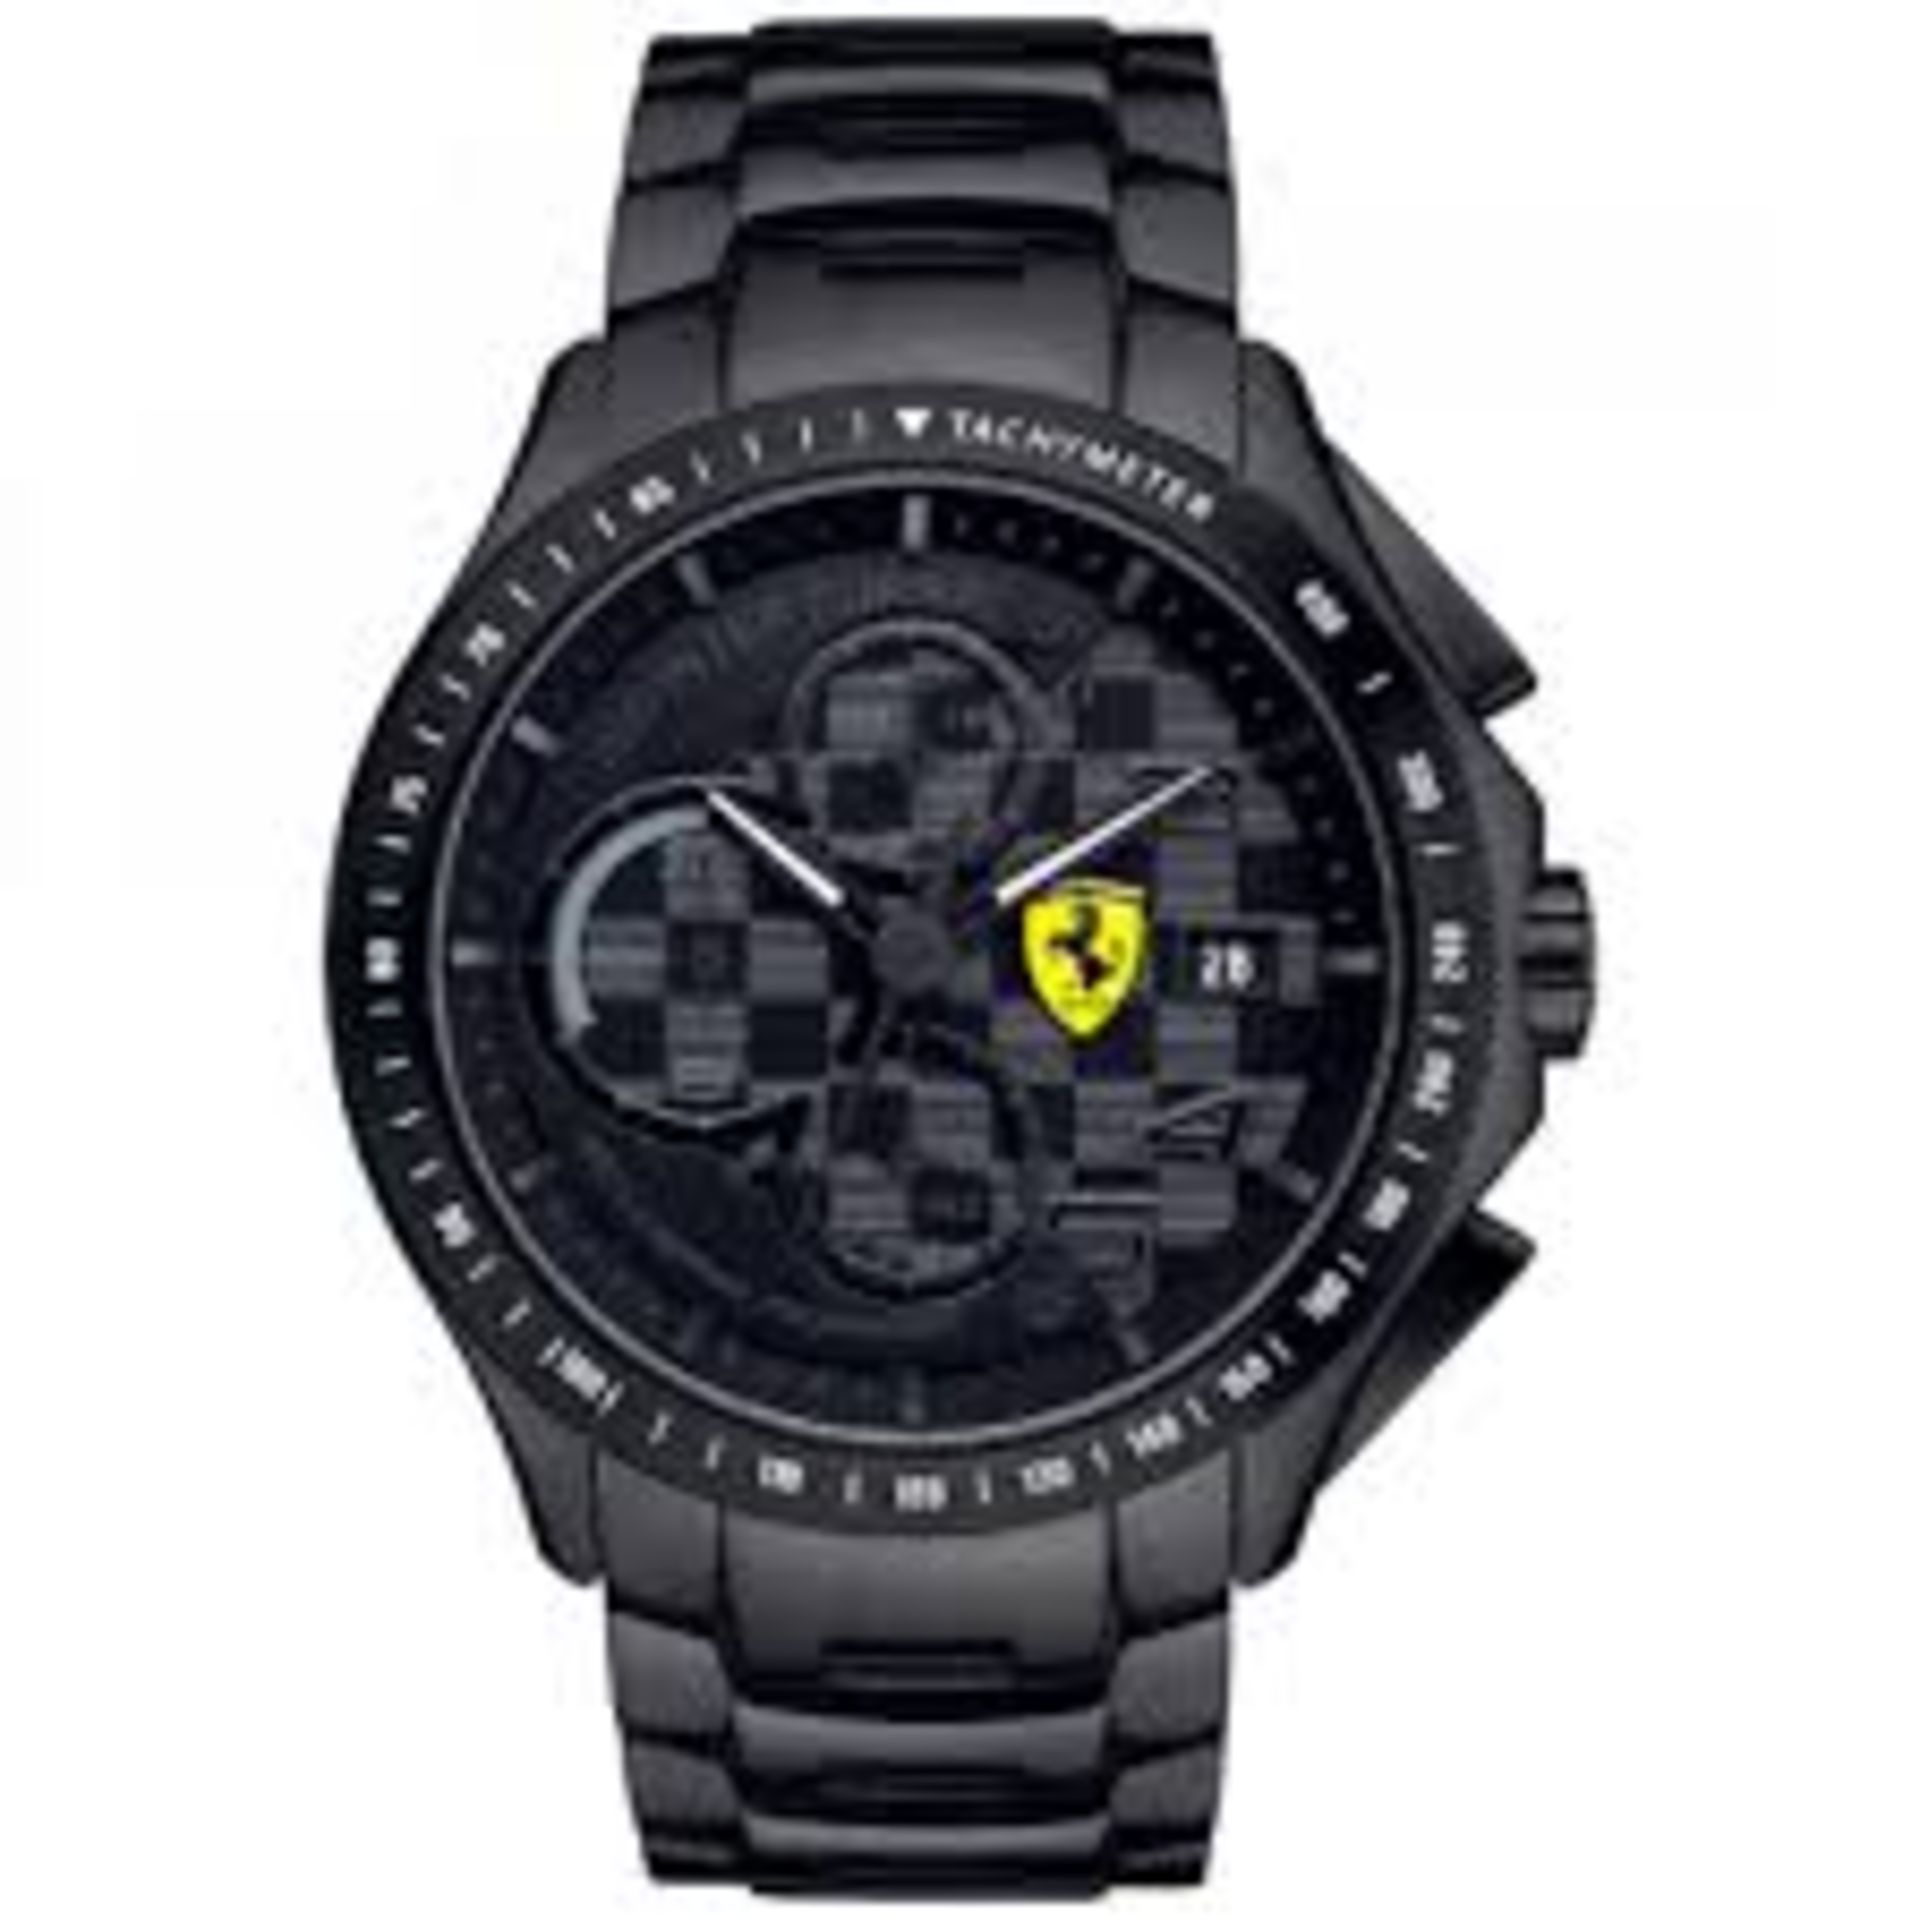 BOXED BRAND NEW SCUDERIA FERRARI RACE DAY BLACK GENTS DESIGNER WRIST WATCH WITH 2 YEARS